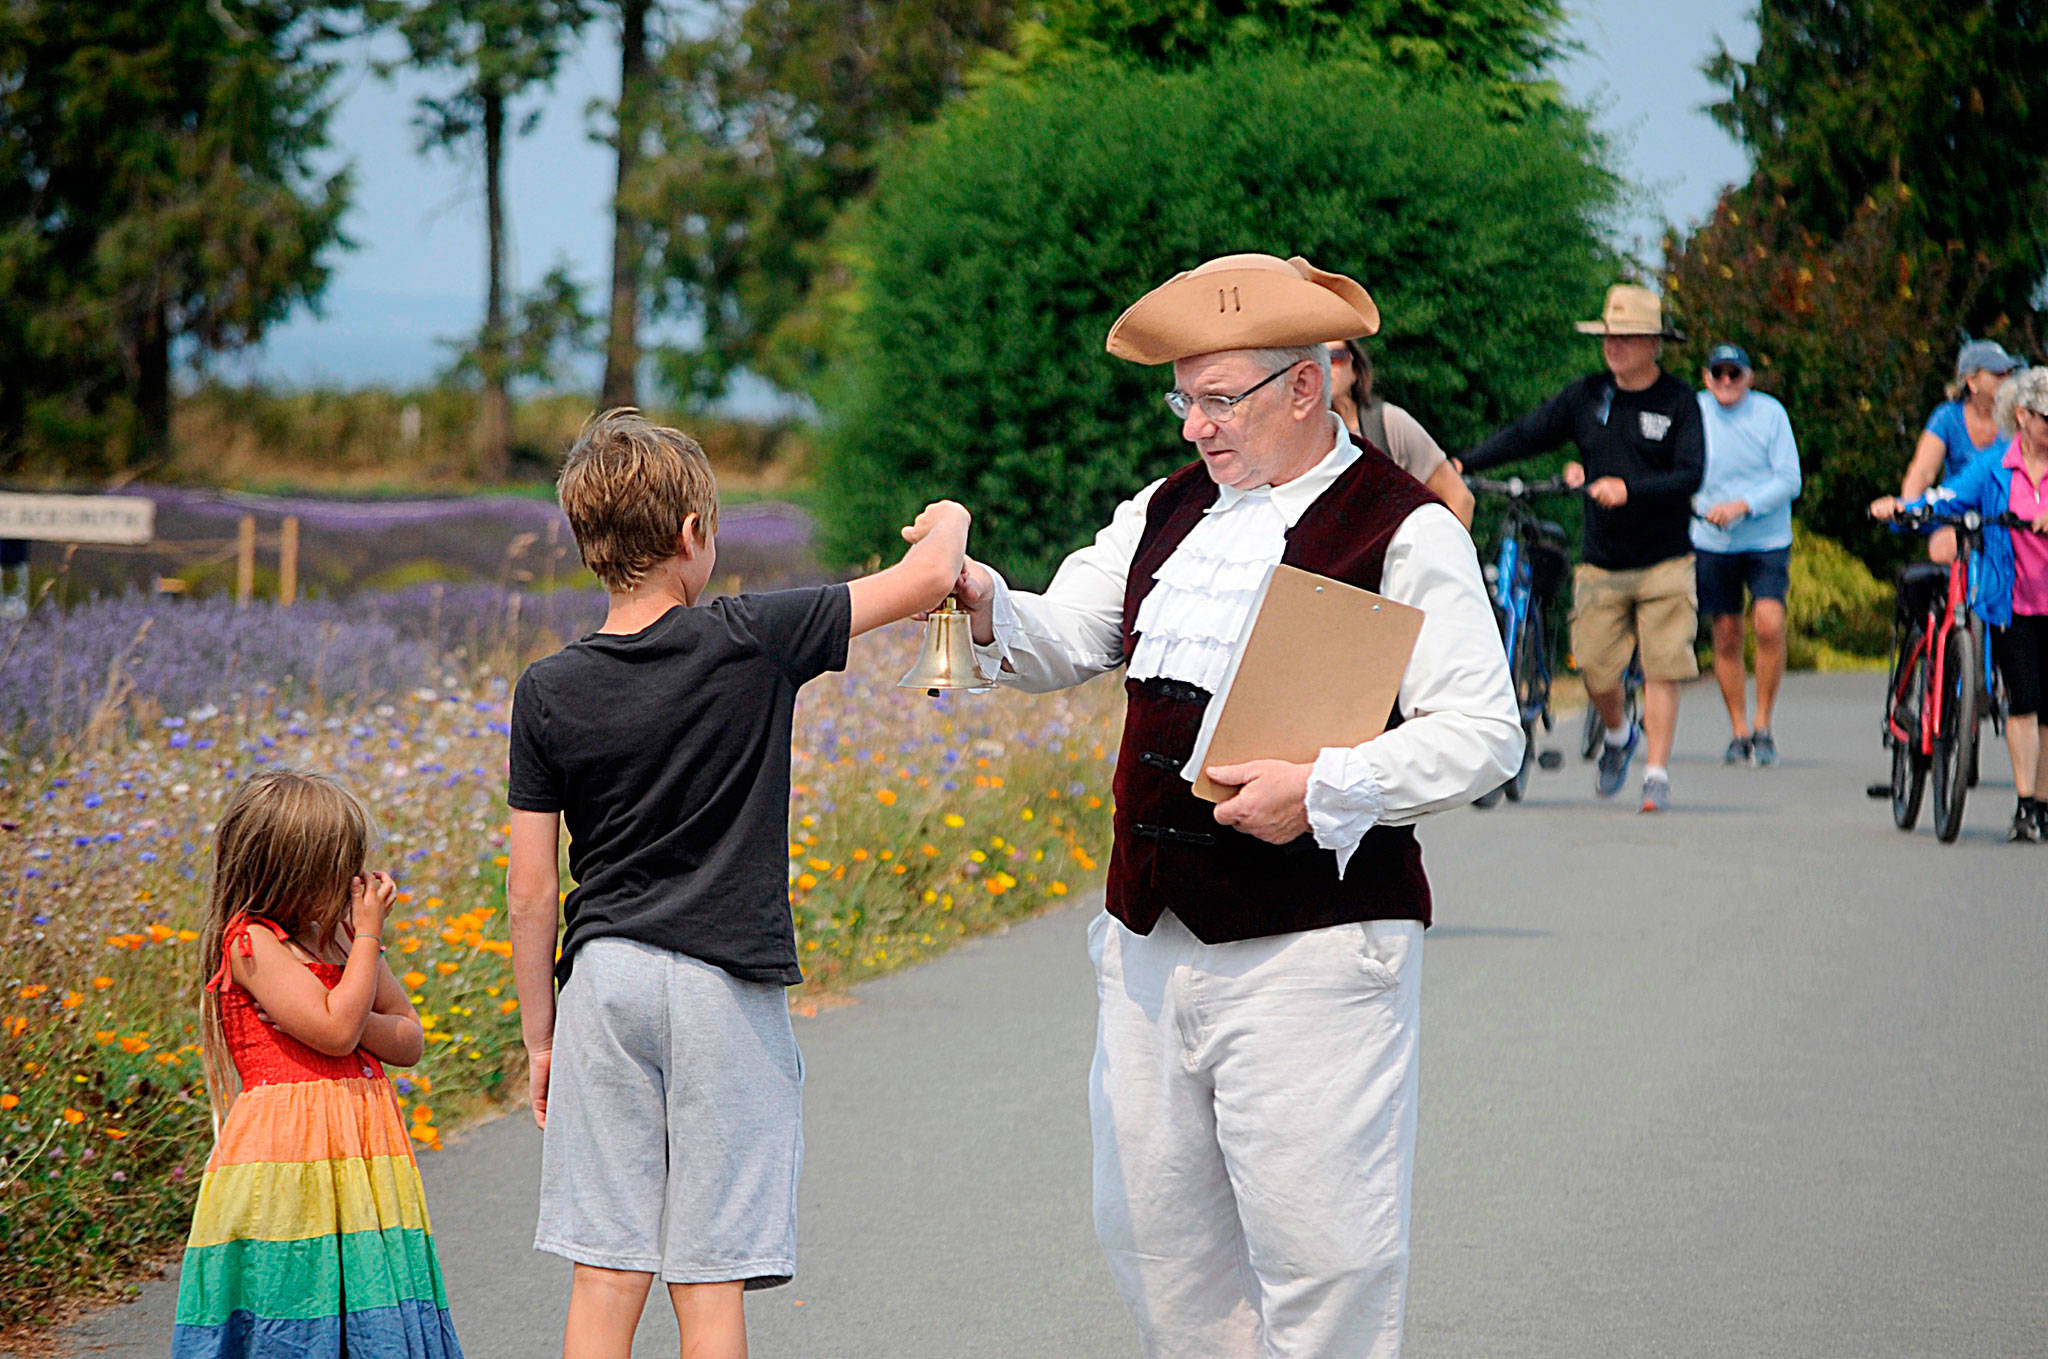 Mick Hersey of Bremerton shares his town crier duties with Lucas, 7, and Eloise Maxfield, 4, of Vashon Island prior to a skirmish at the Northwest Colonial Festival. Hersey said he’s held the role for each of the festival’s seven years.